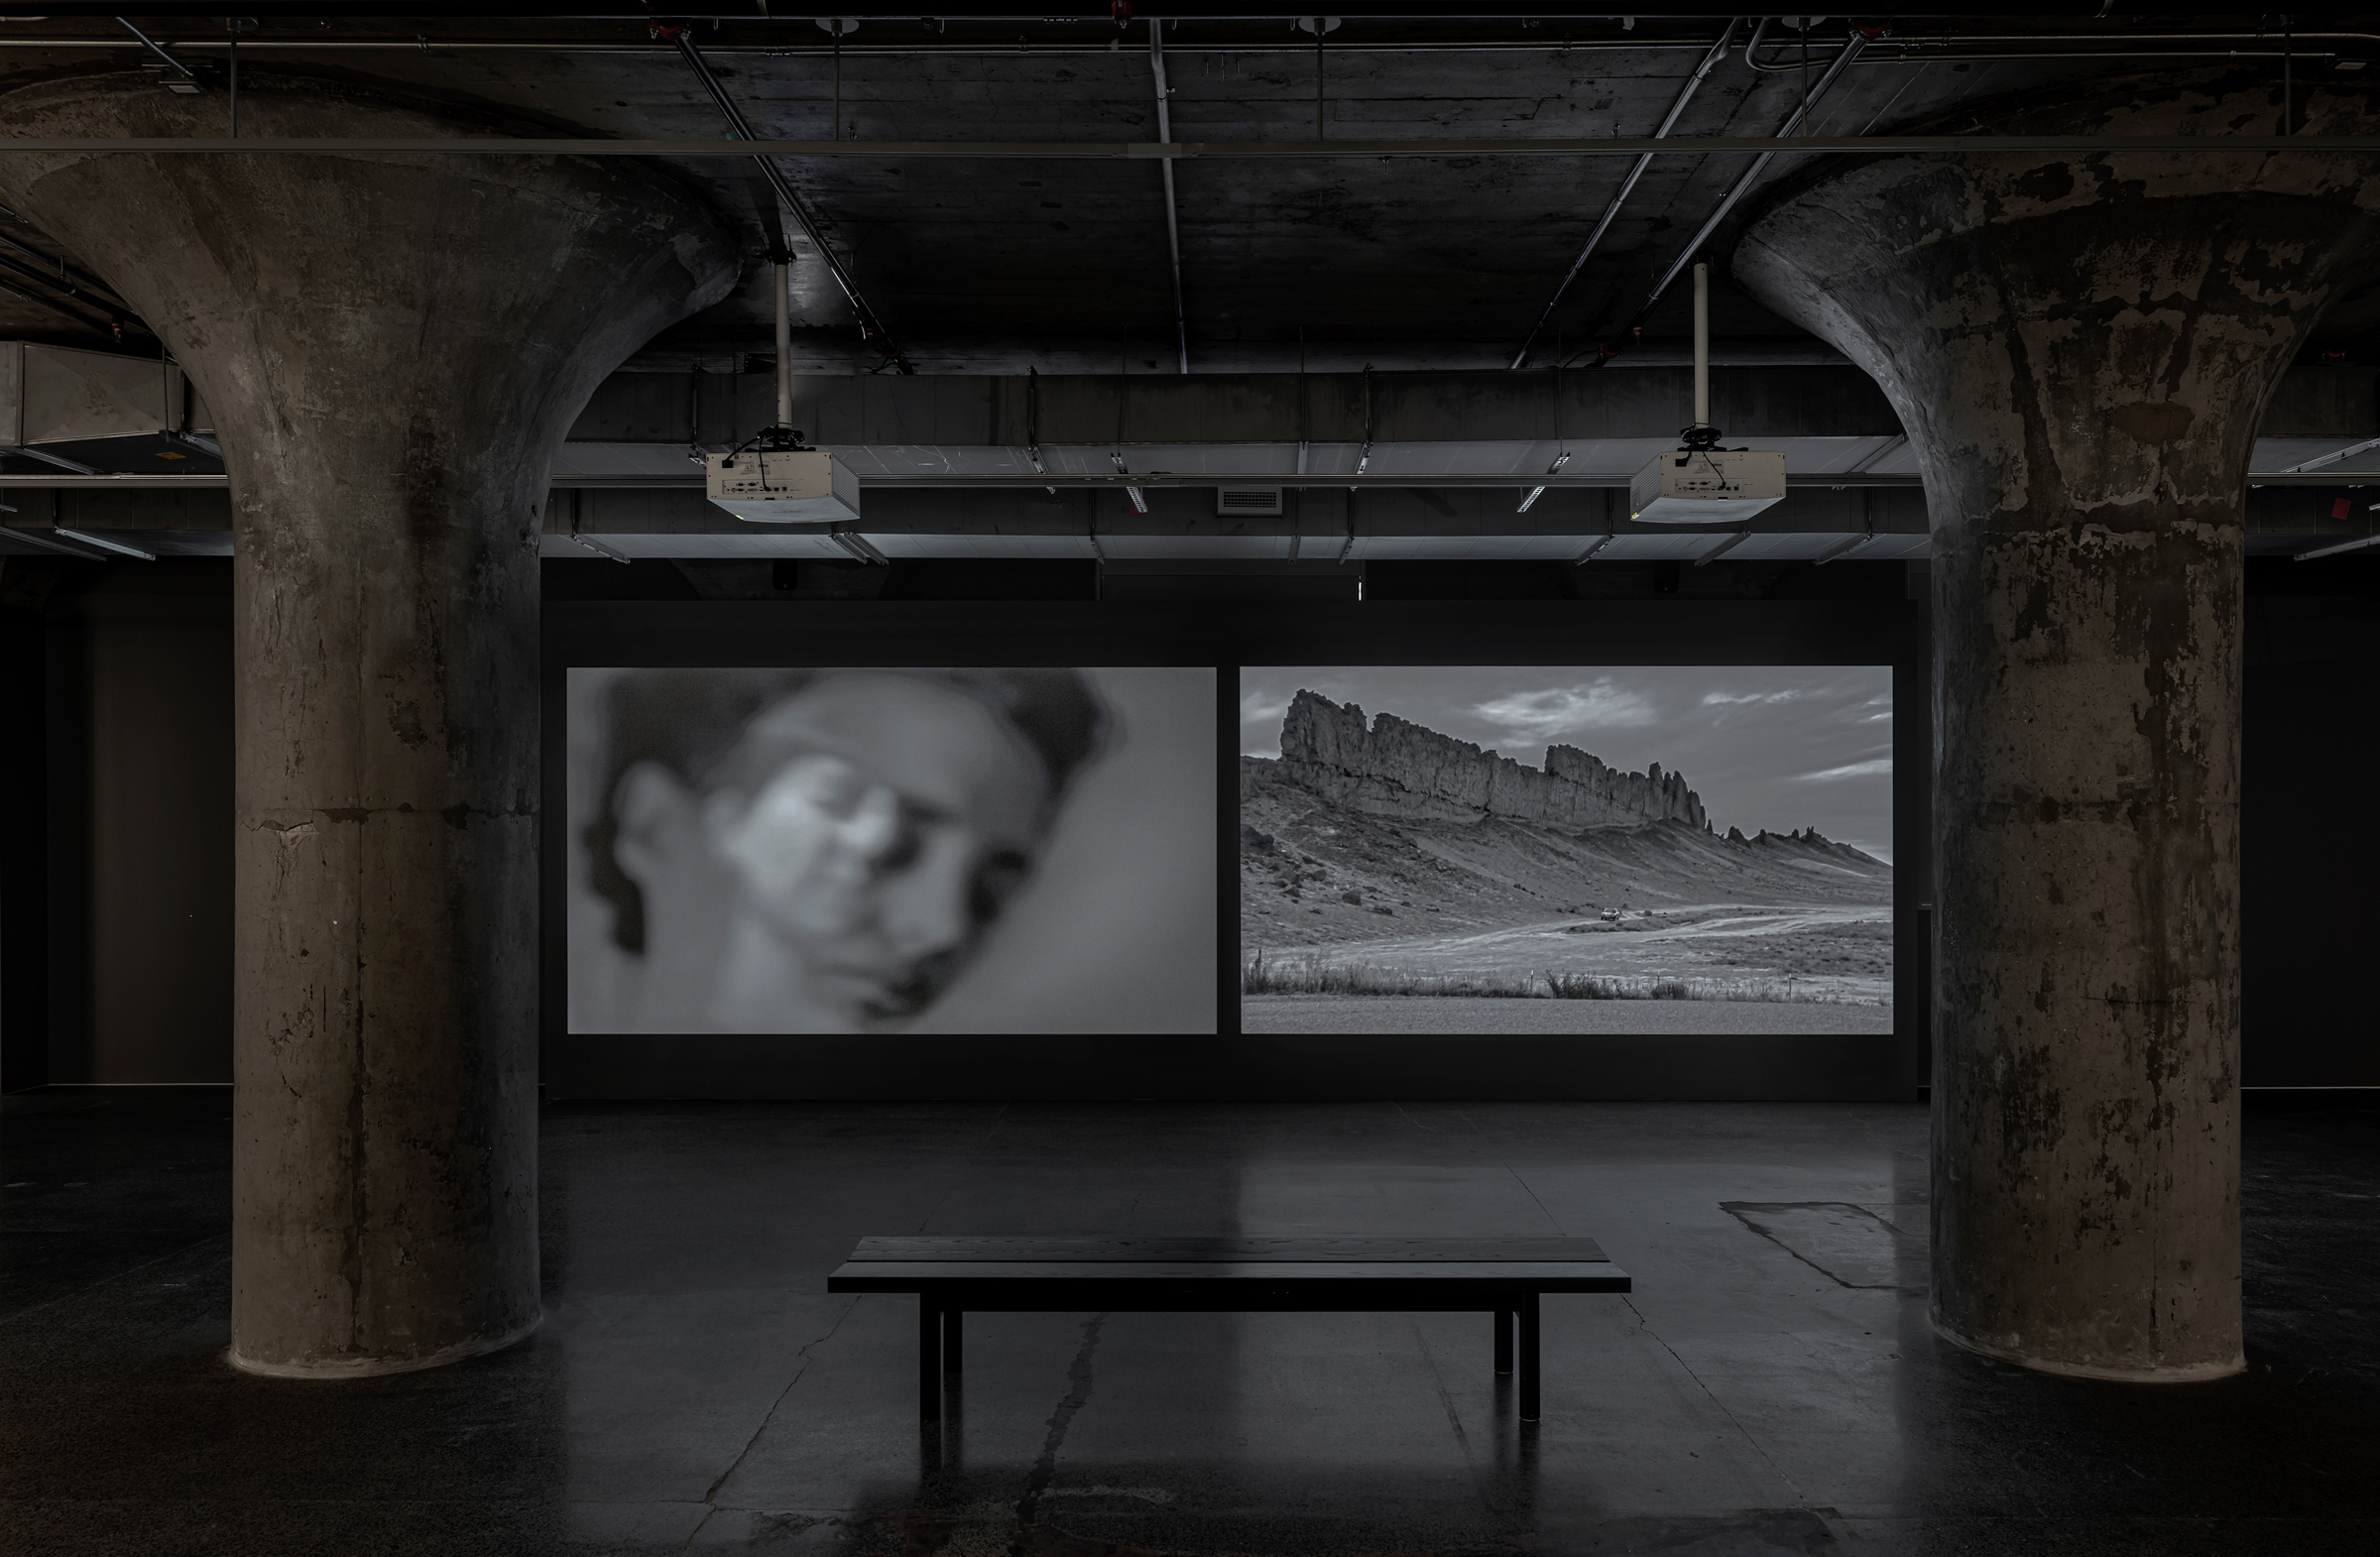     Shirin Neshat, Land of Dreams, installation view (Land of Dreams), MOCA Toronto, 2022. © Shirin Neshat. Courtesy of the artist; Gladstone Gallery, New York and Brussels; and Goodman Gallery, Johannesburg, Cape Town, and London. Photo: Toni Hafkenscheid

